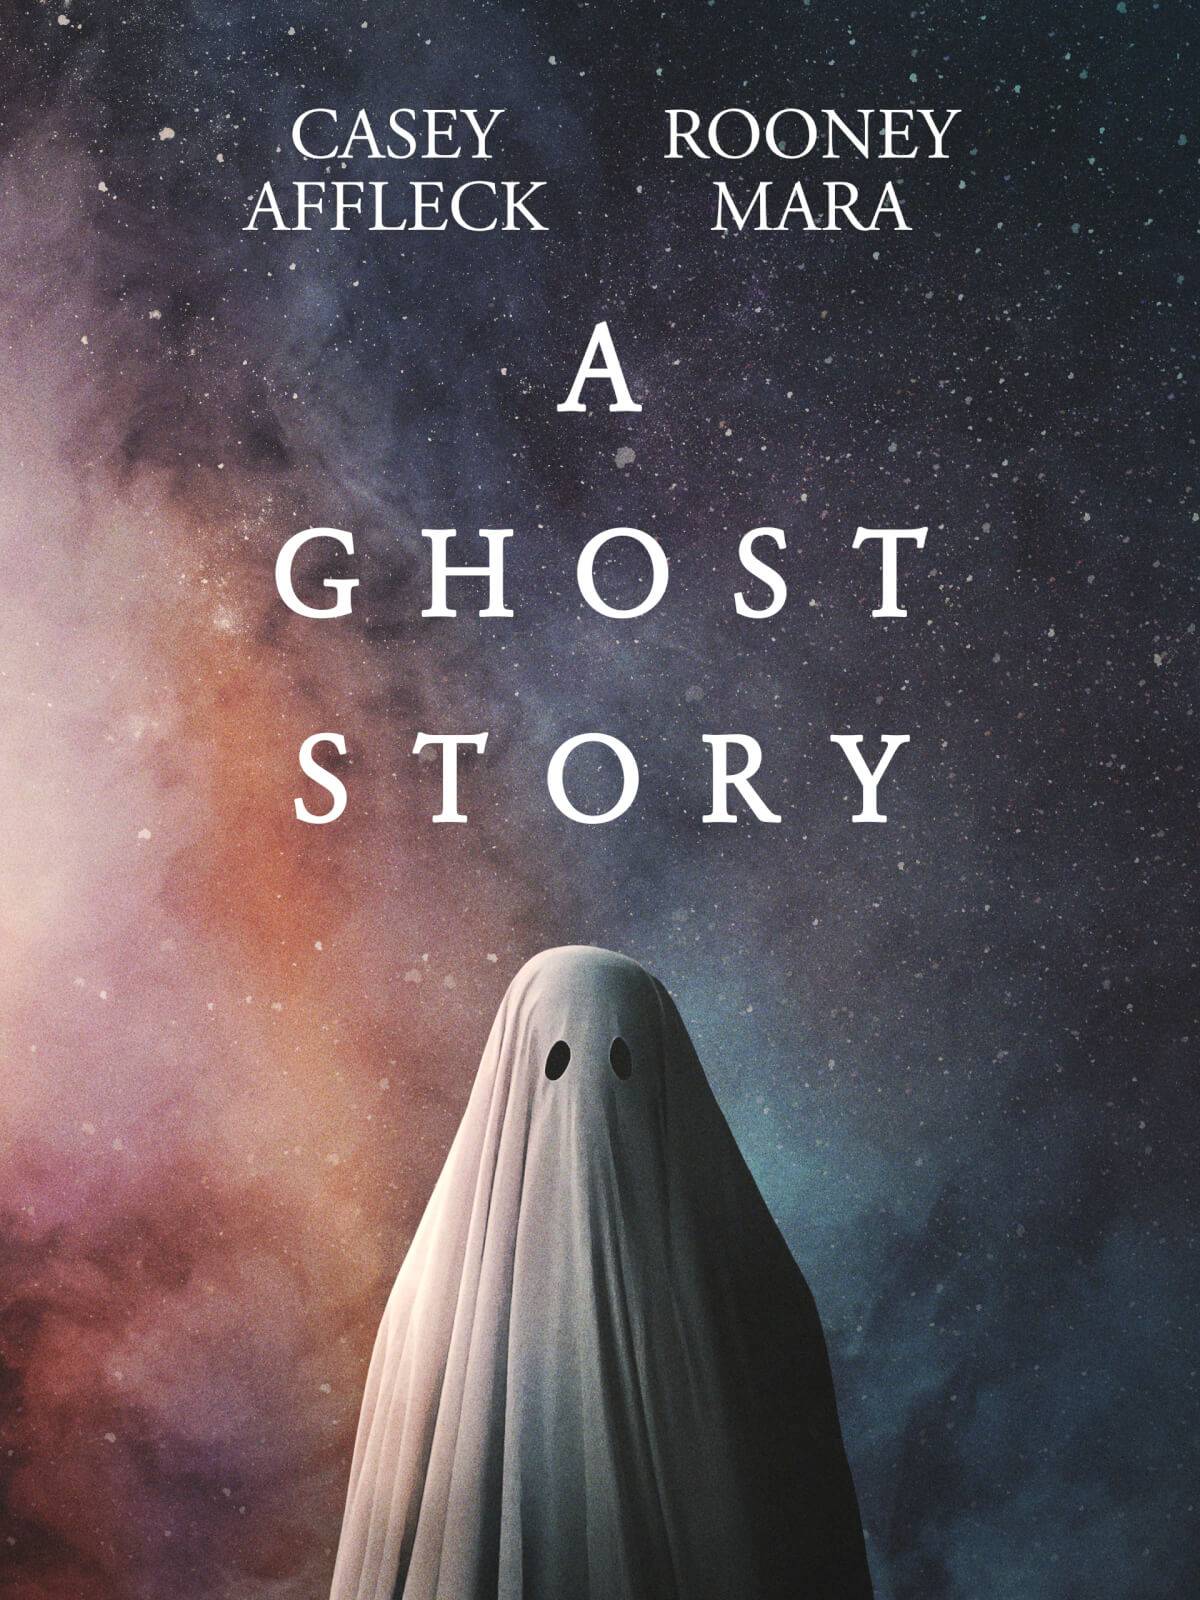 A Ghost Story (David Lowery, 2017)